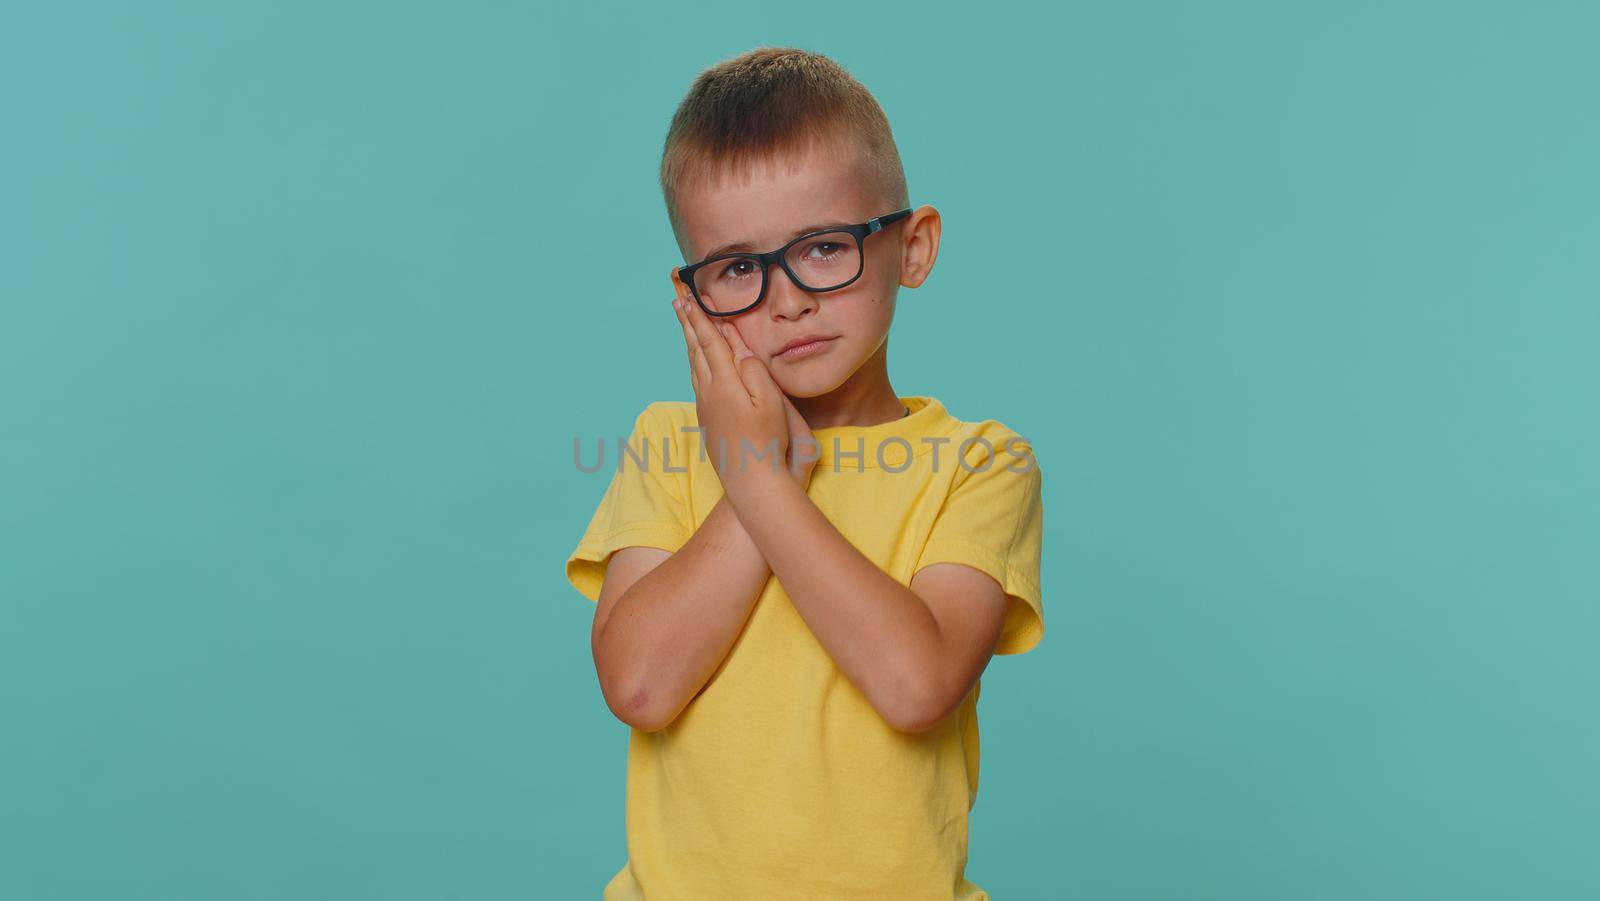 Dental problem. Little toddler children boy touching cheek, closing eyes with expression of terrible suffer from painful toothache, sensitive teeth, cavities. Young preschool kid in on blue background